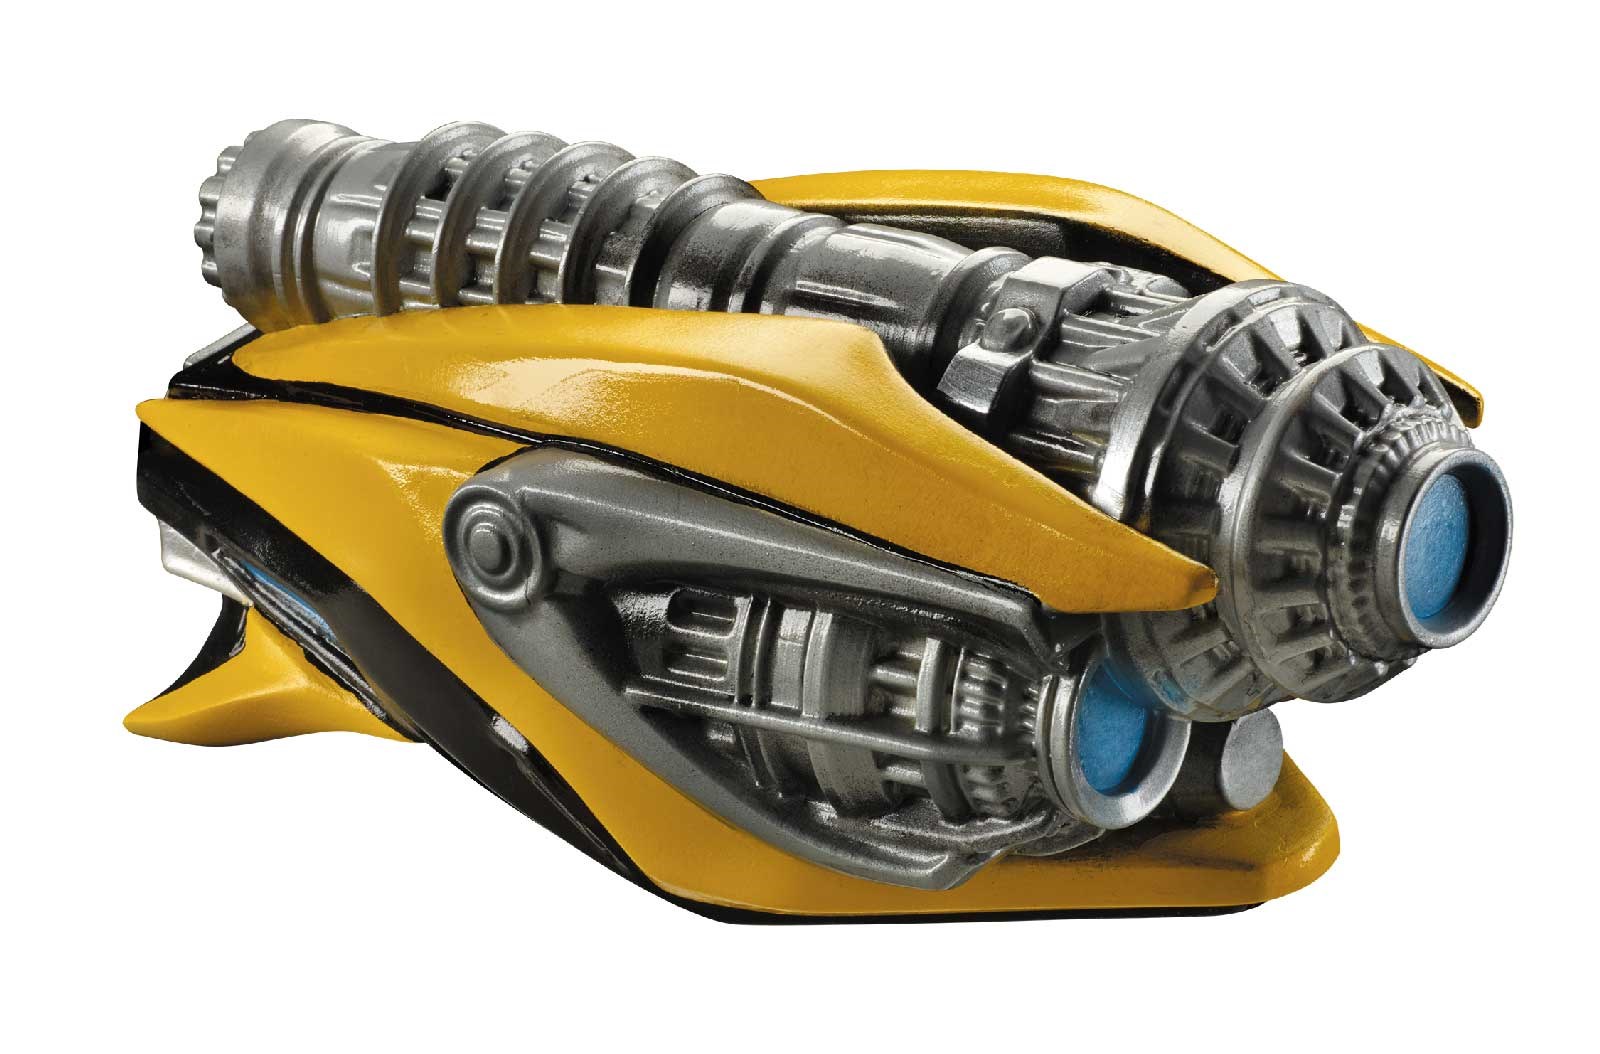 Transformers Age of Extinction  - Bumblebee Cannon